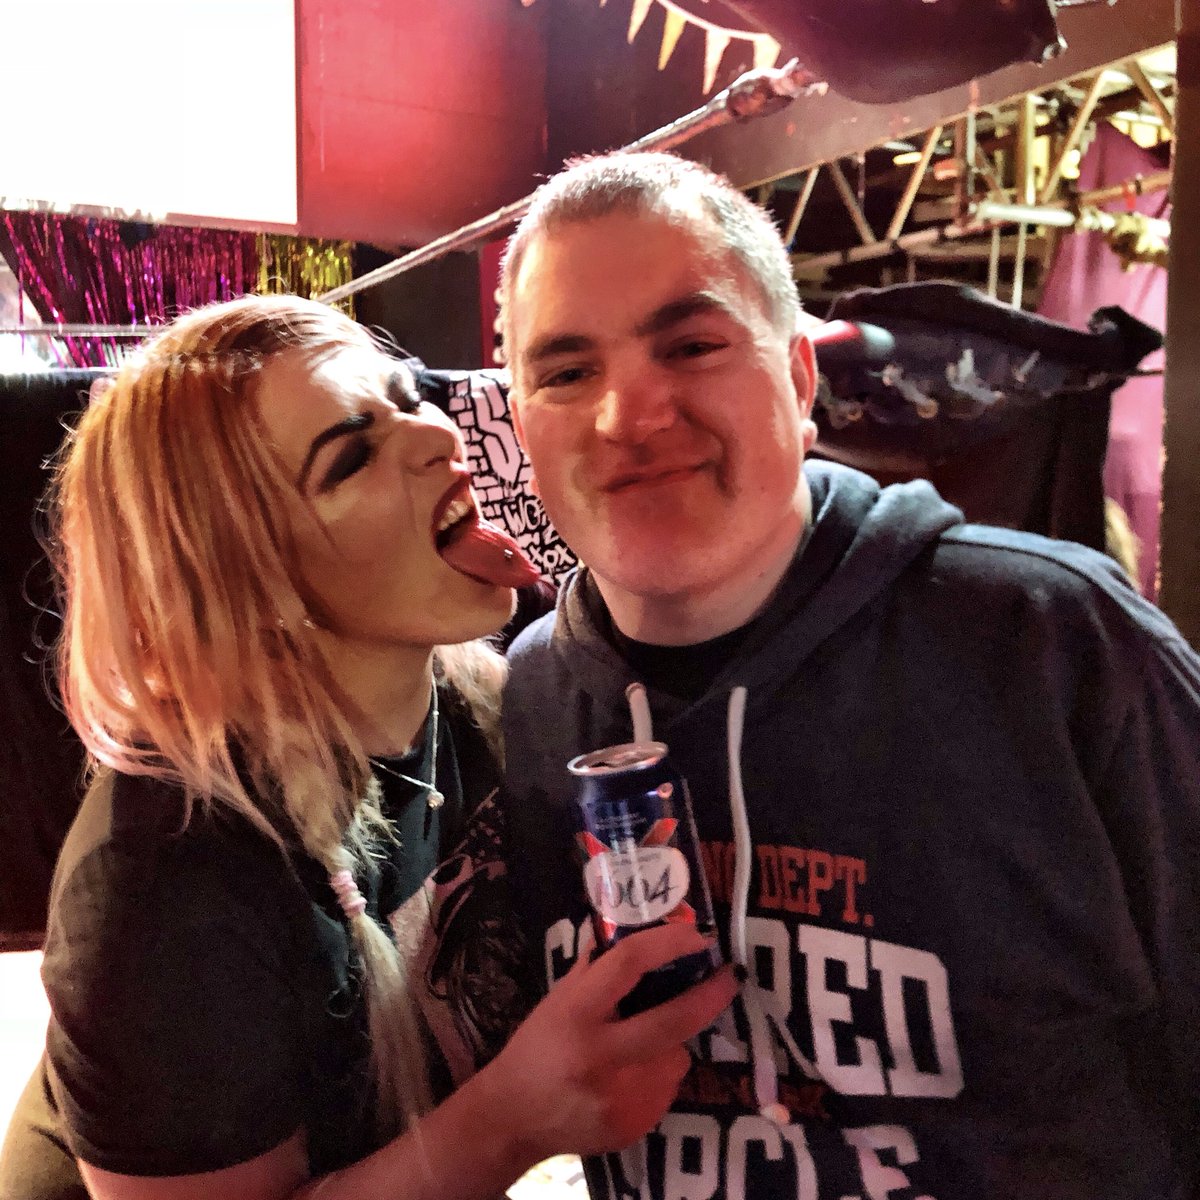 It was great to meet @mothfromdaflats at @ProWrestlingEVE  Don’t  miss her USA debut as part of team @Fightclubpro as they join @PWRevolver at #pancakesandpiledrivers at Wrestlecon!!! #FightClubOnTour 

Tickets: embed.showclix.com/event/the-wres…